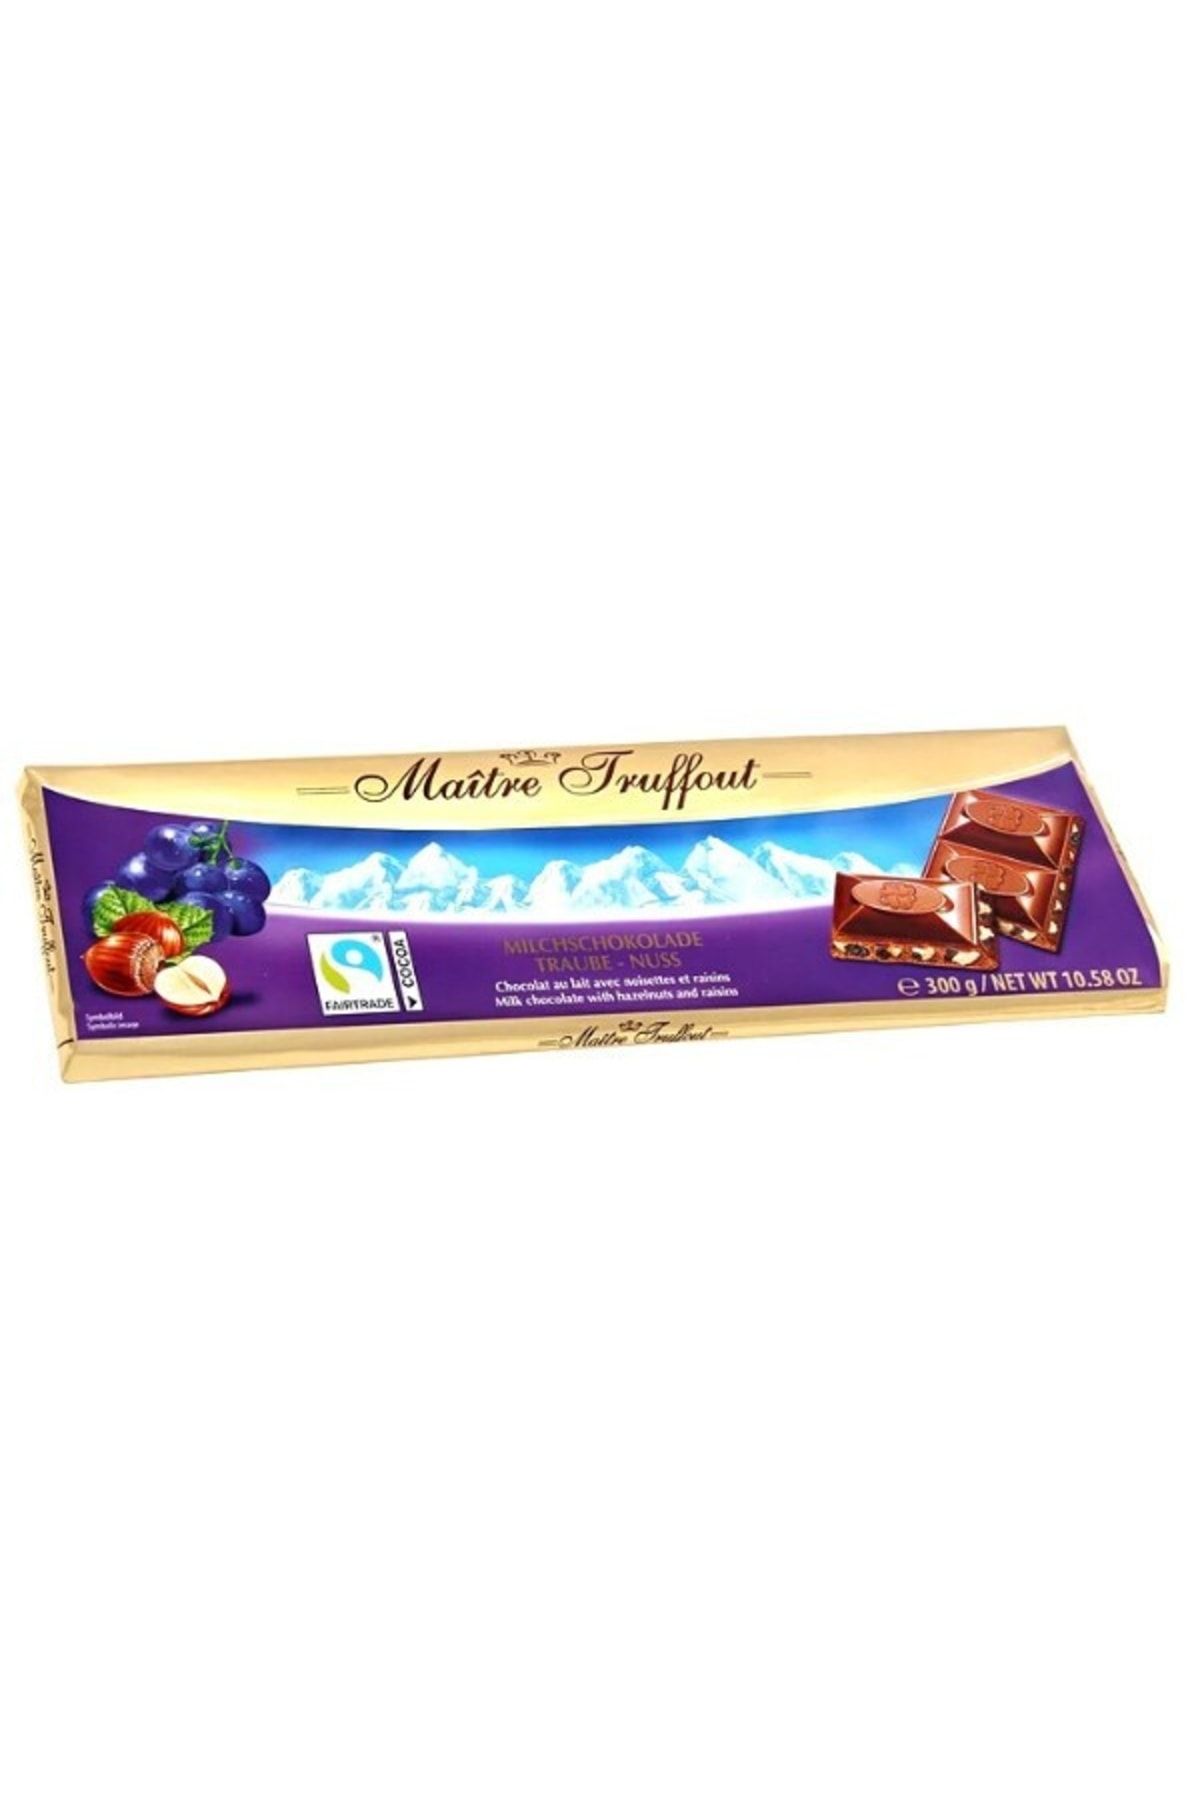 Lindt Maitre Truffout Milk Chocolate With Raisins And Hazelnuts 300g